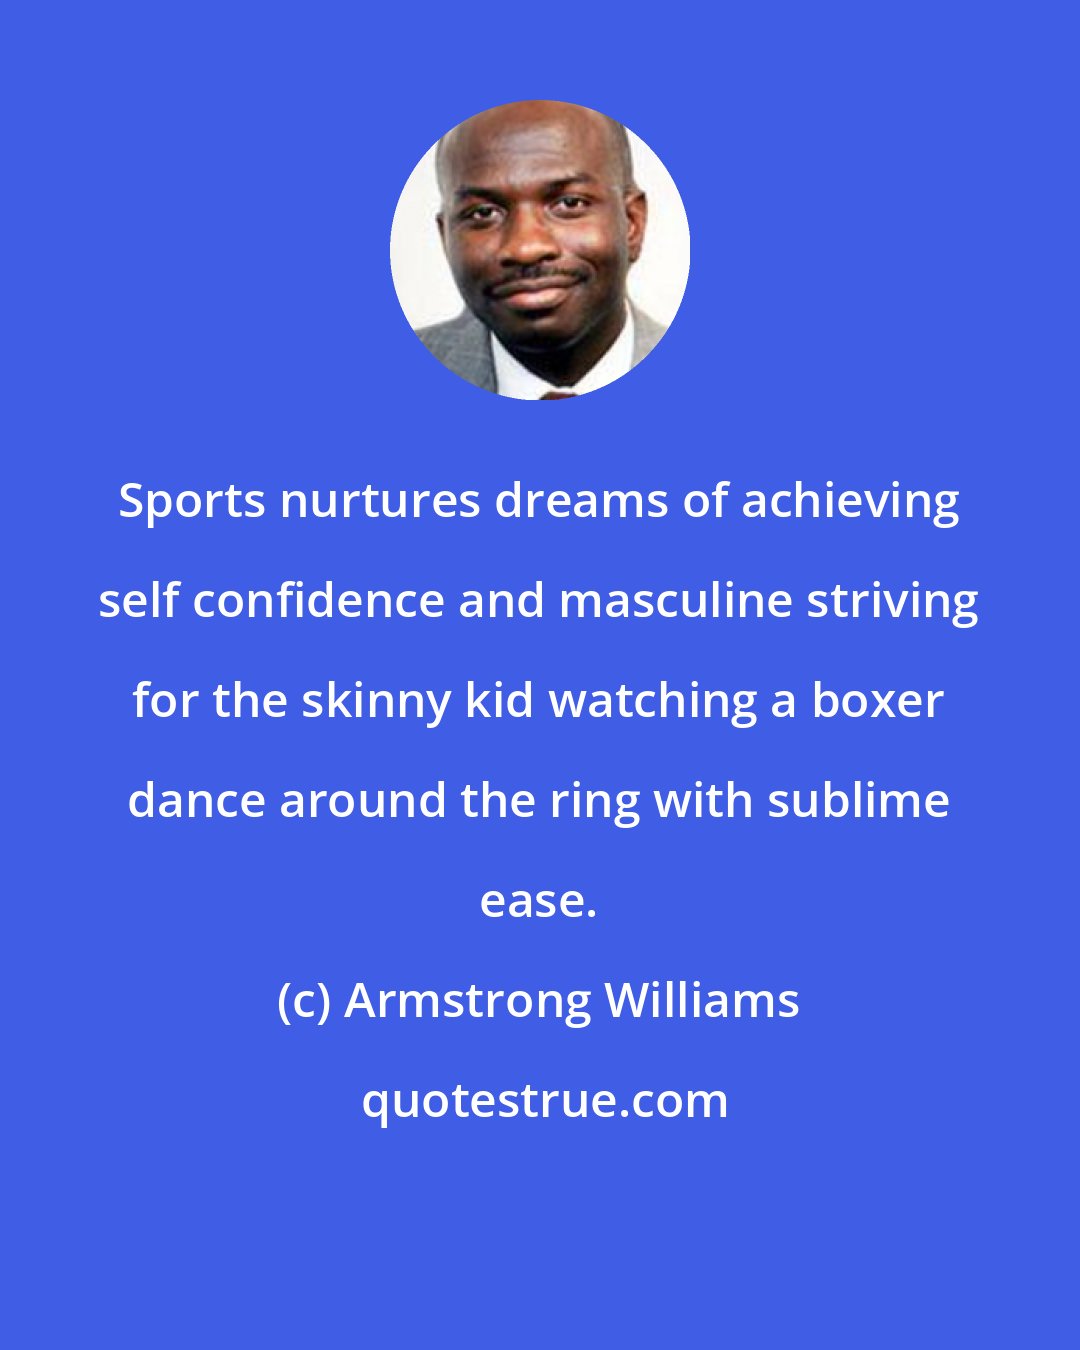 Armstrong Williams: Sports nurtures dreams of achieving self confidence and masculine striving for the skinny kid watching a boxer dance around the ring with sublime ease.